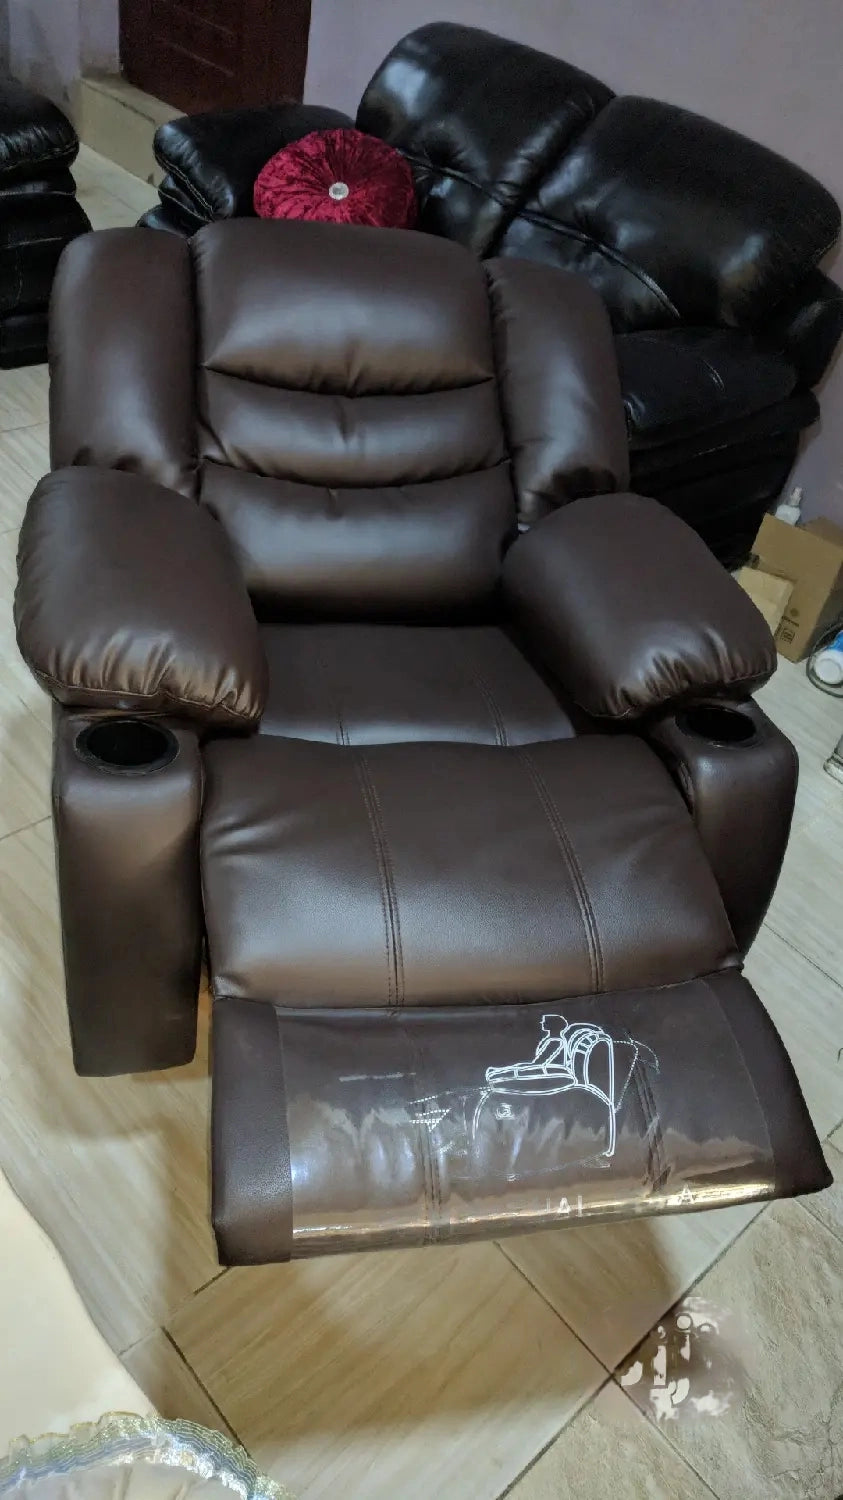 Original Executive Recliner Cinema and Theatre Seating HOG-Home Office Garden online marketplace.